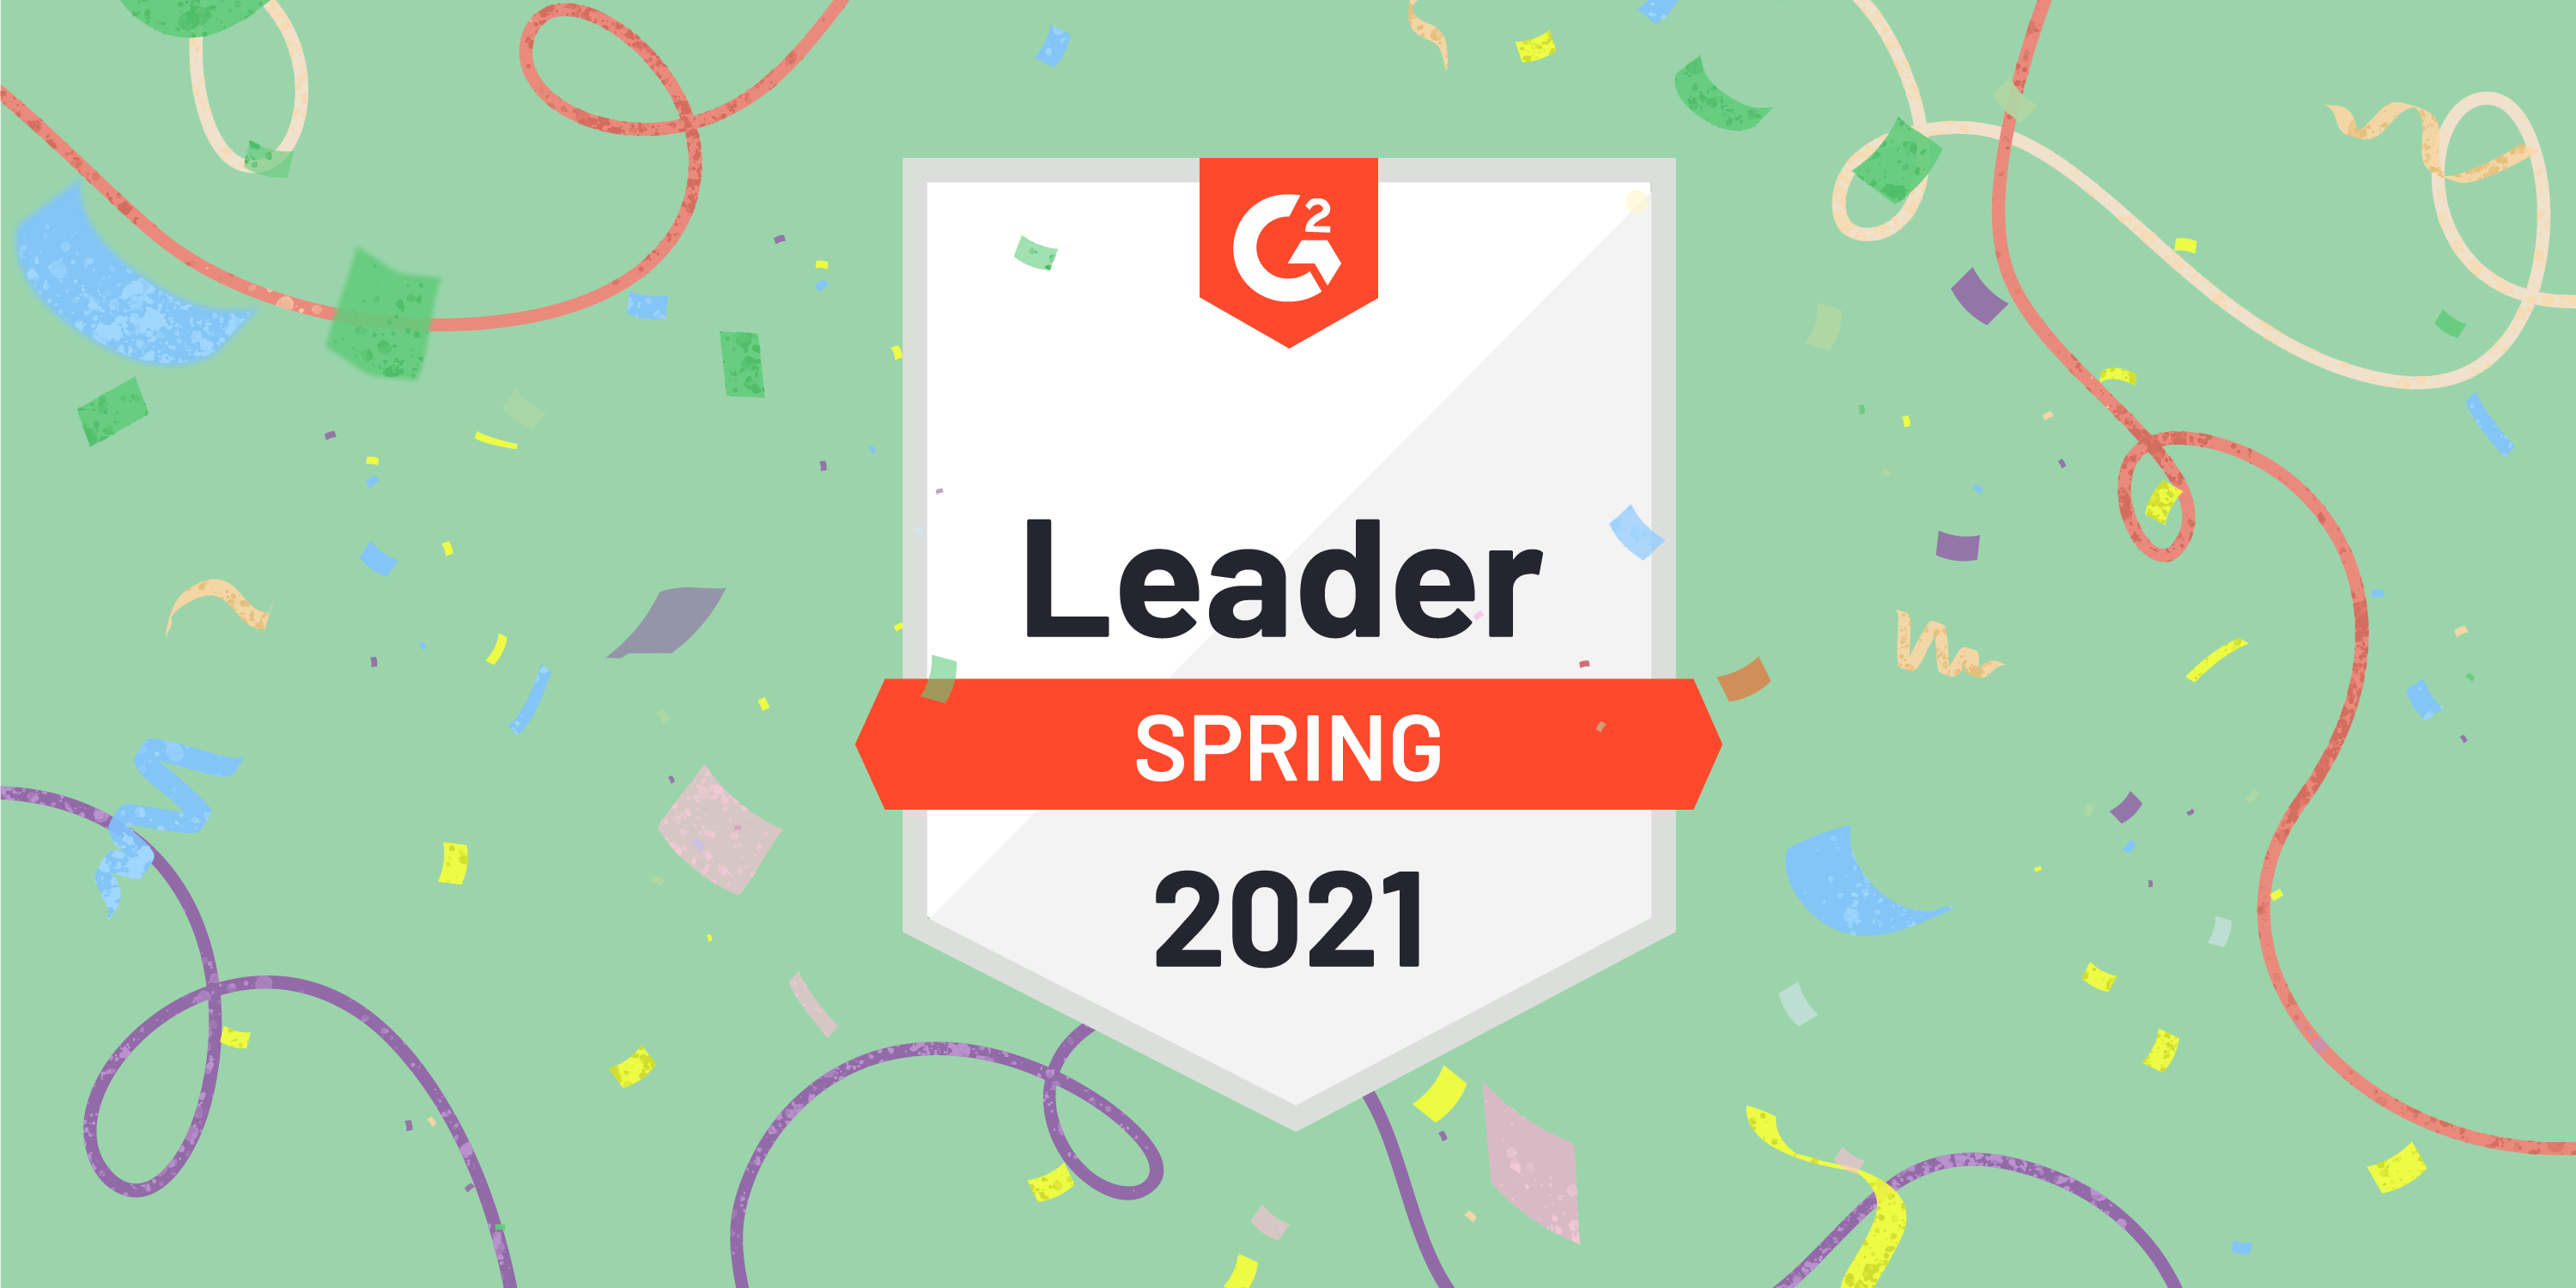 Snov.io Recognized Among G2 Spring 2021 Leaders